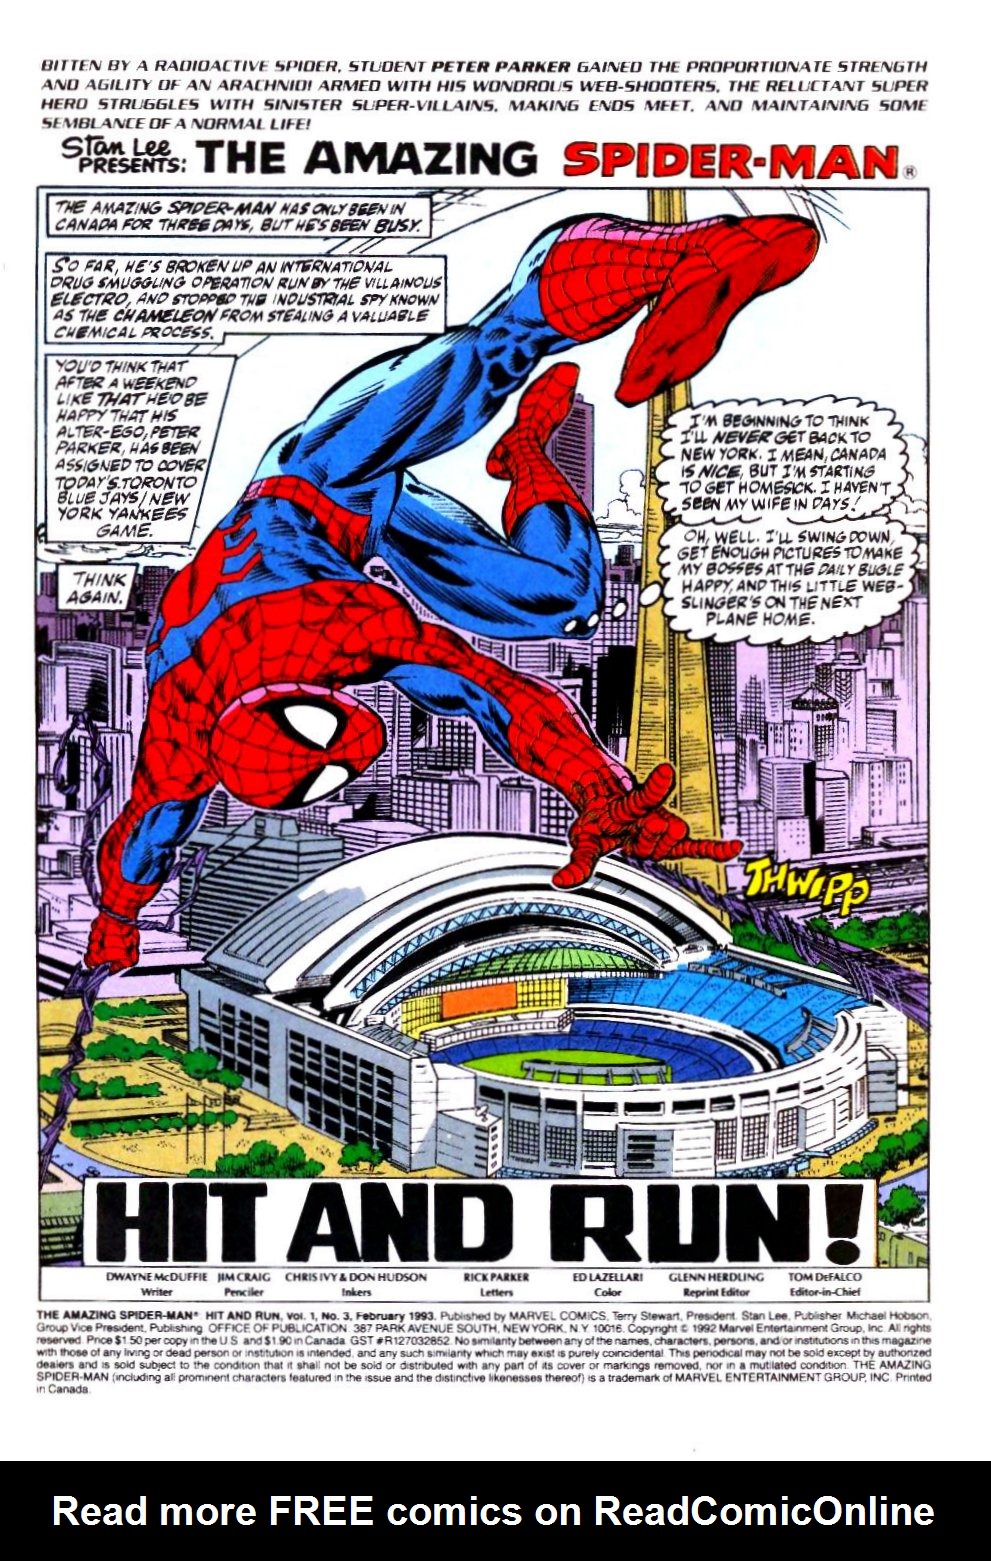 Read online The Amazing Spider-Man: Hit and Run! comic -  Issue # Full - 2